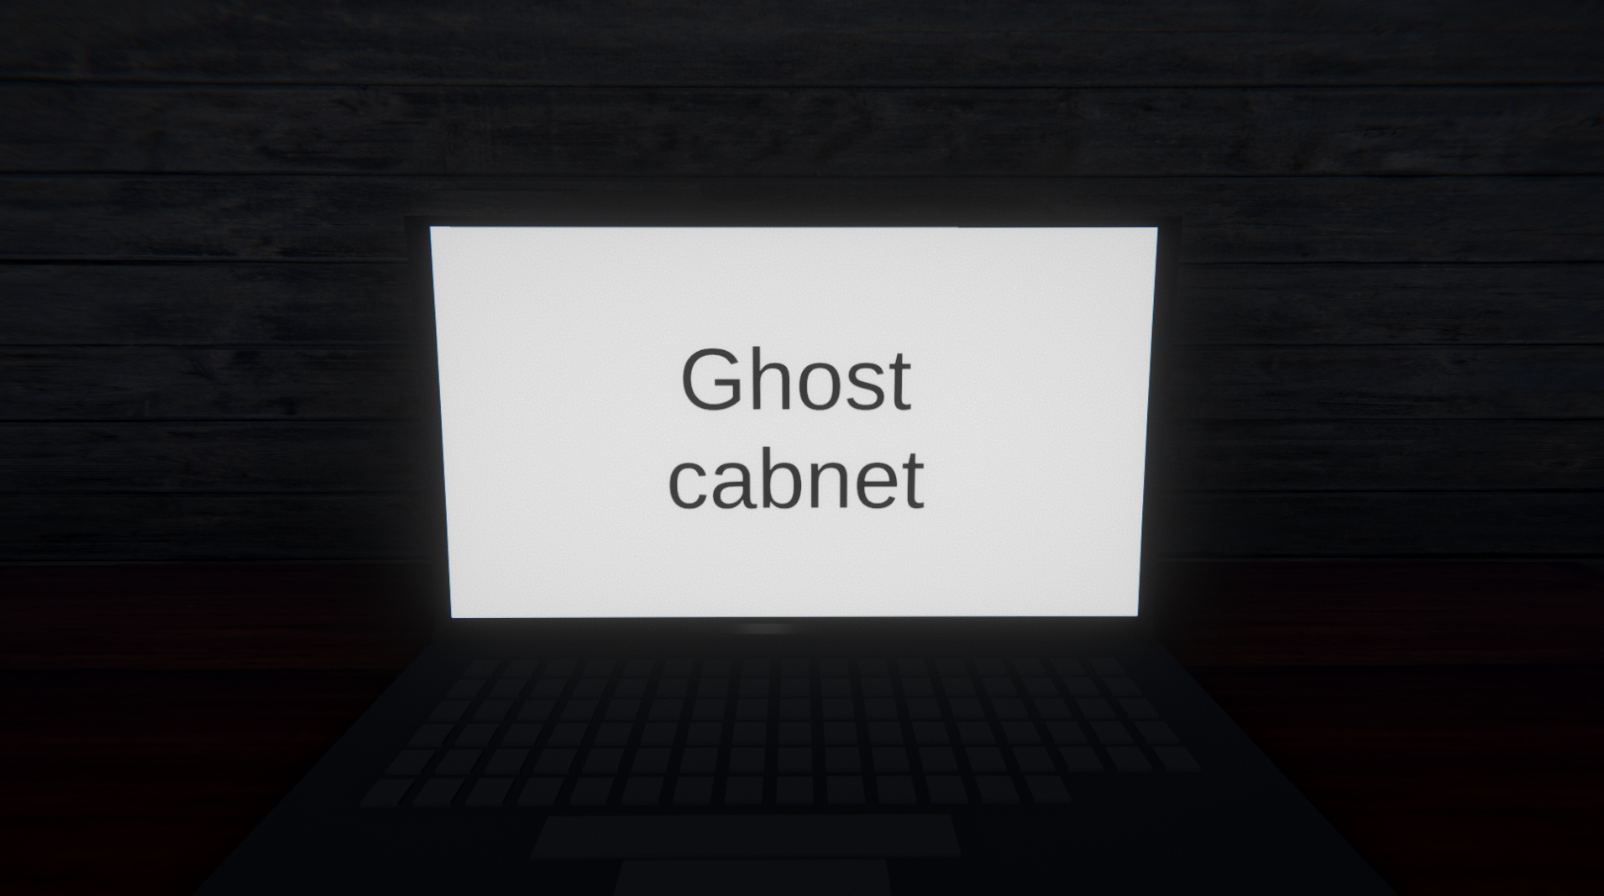 Ghost cabnet